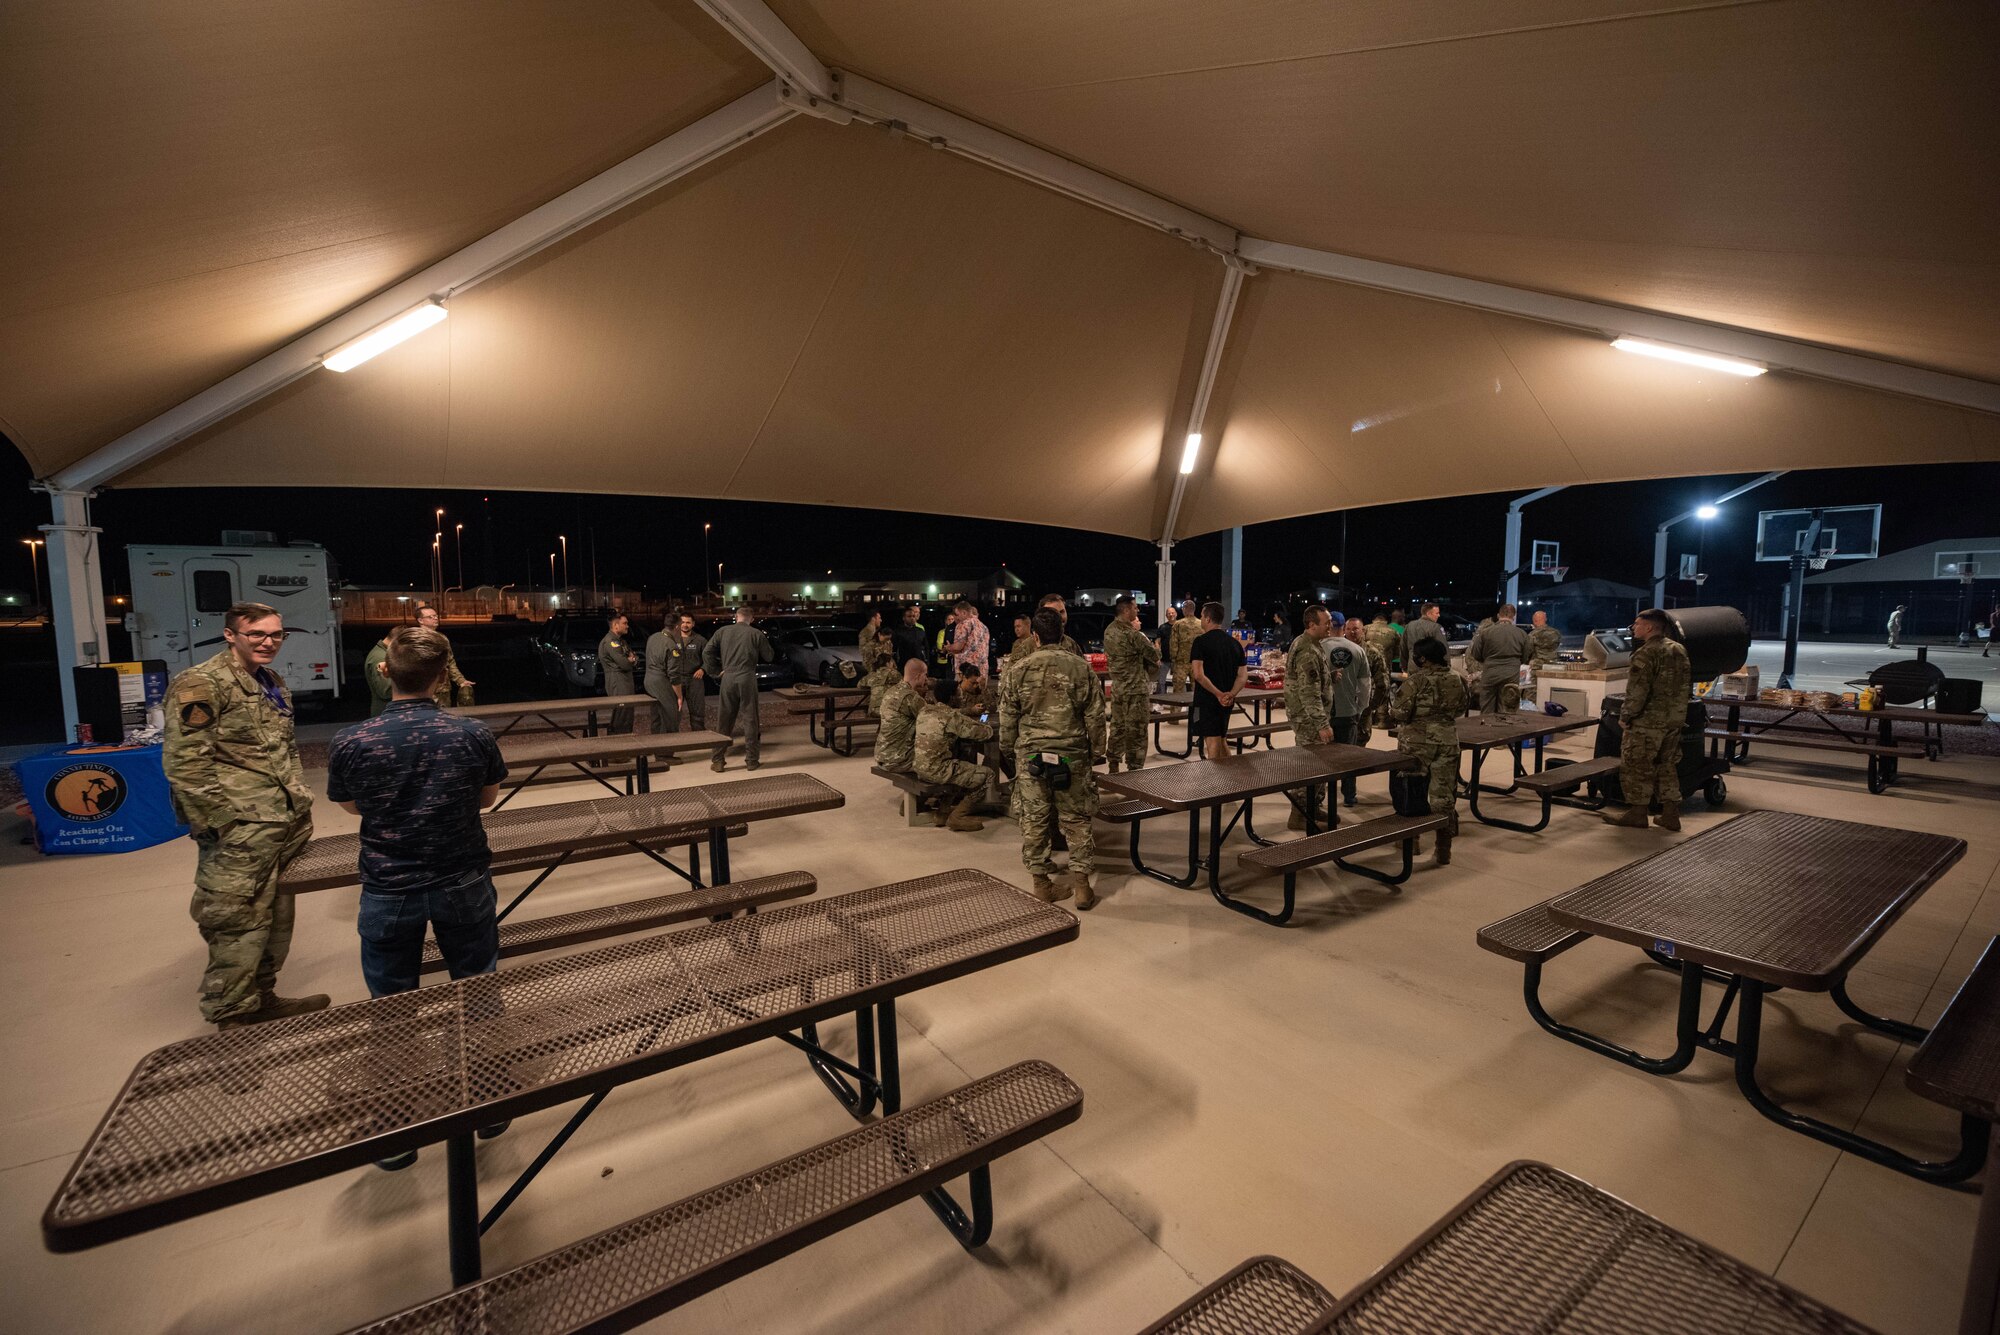 Airmen attended a late night barbecue hosted by wing leadership.